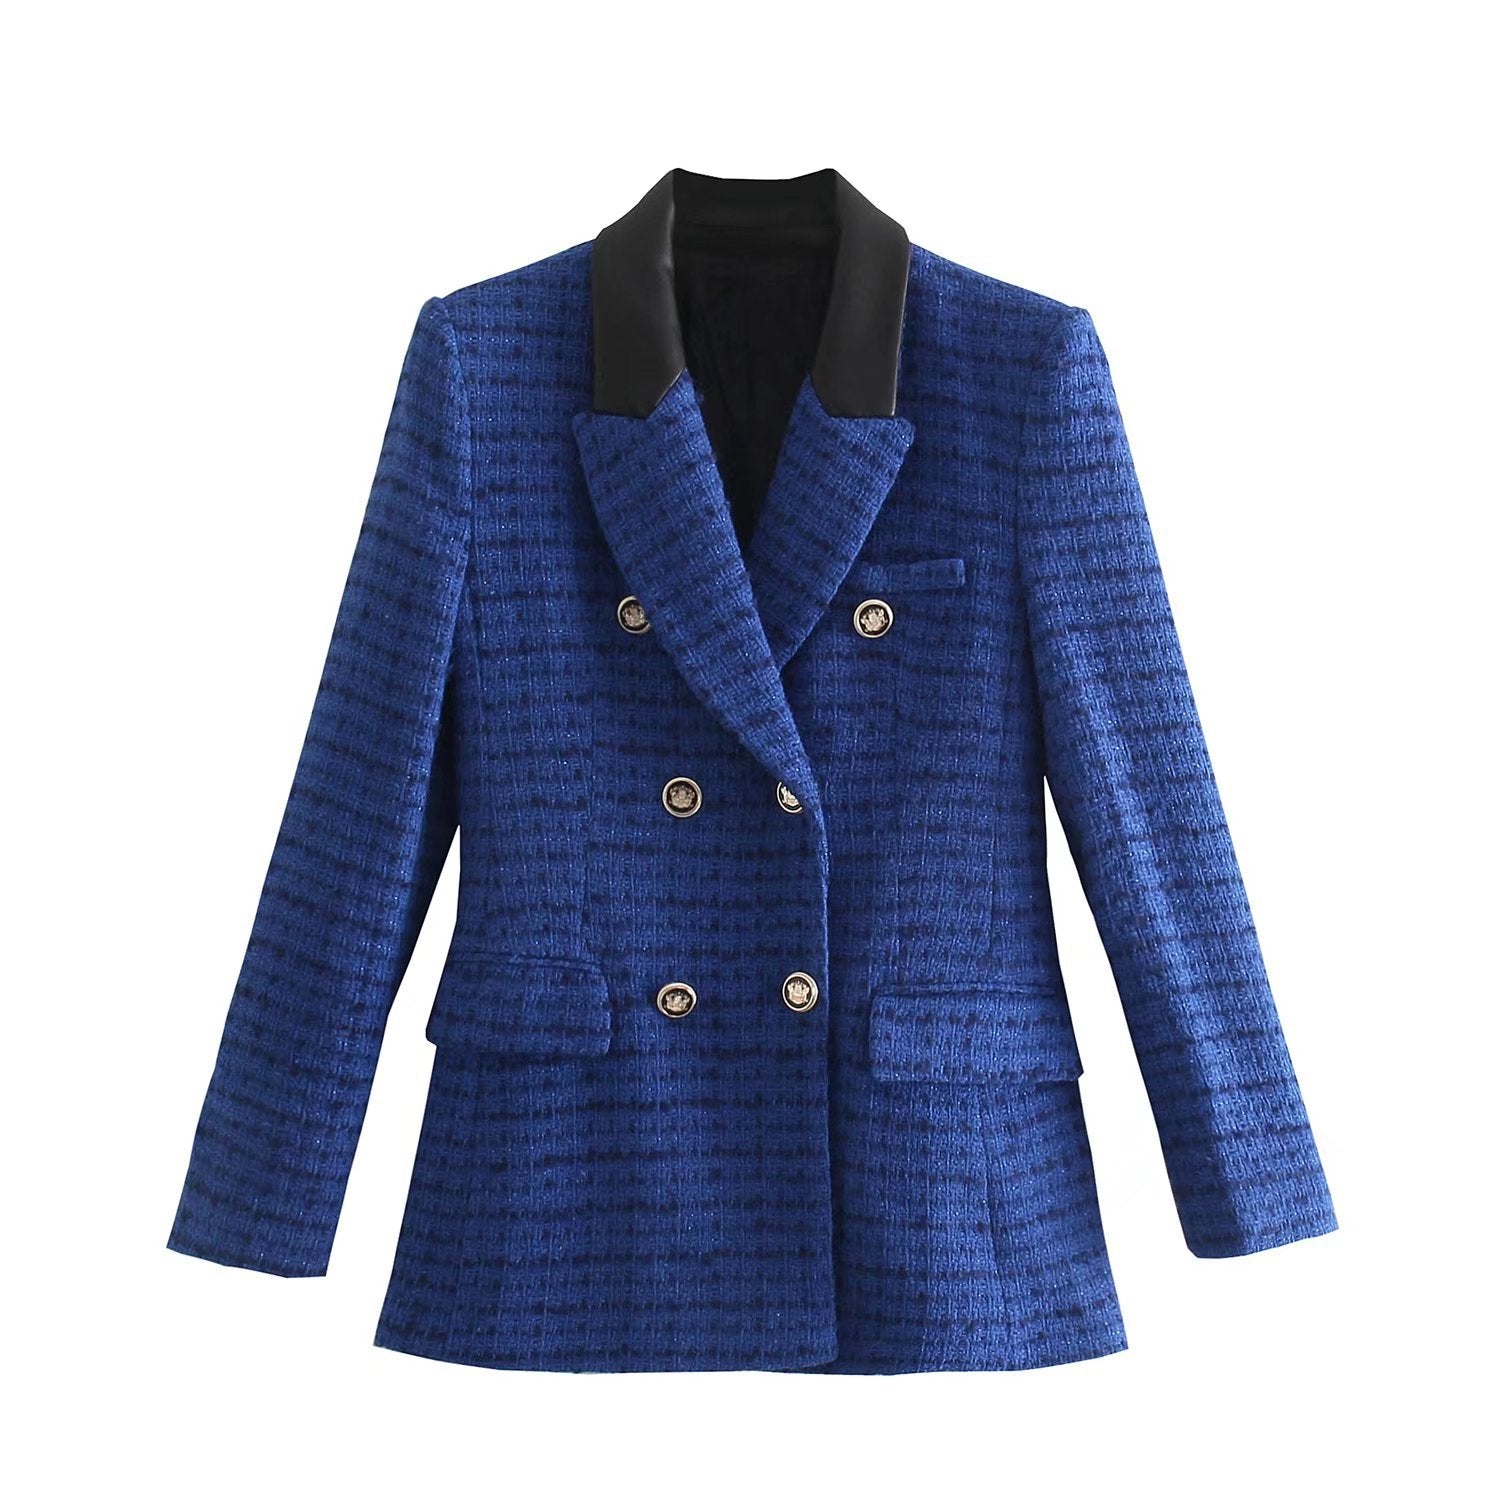 Women's Faux Leather Stitching Textured Suit Jacket